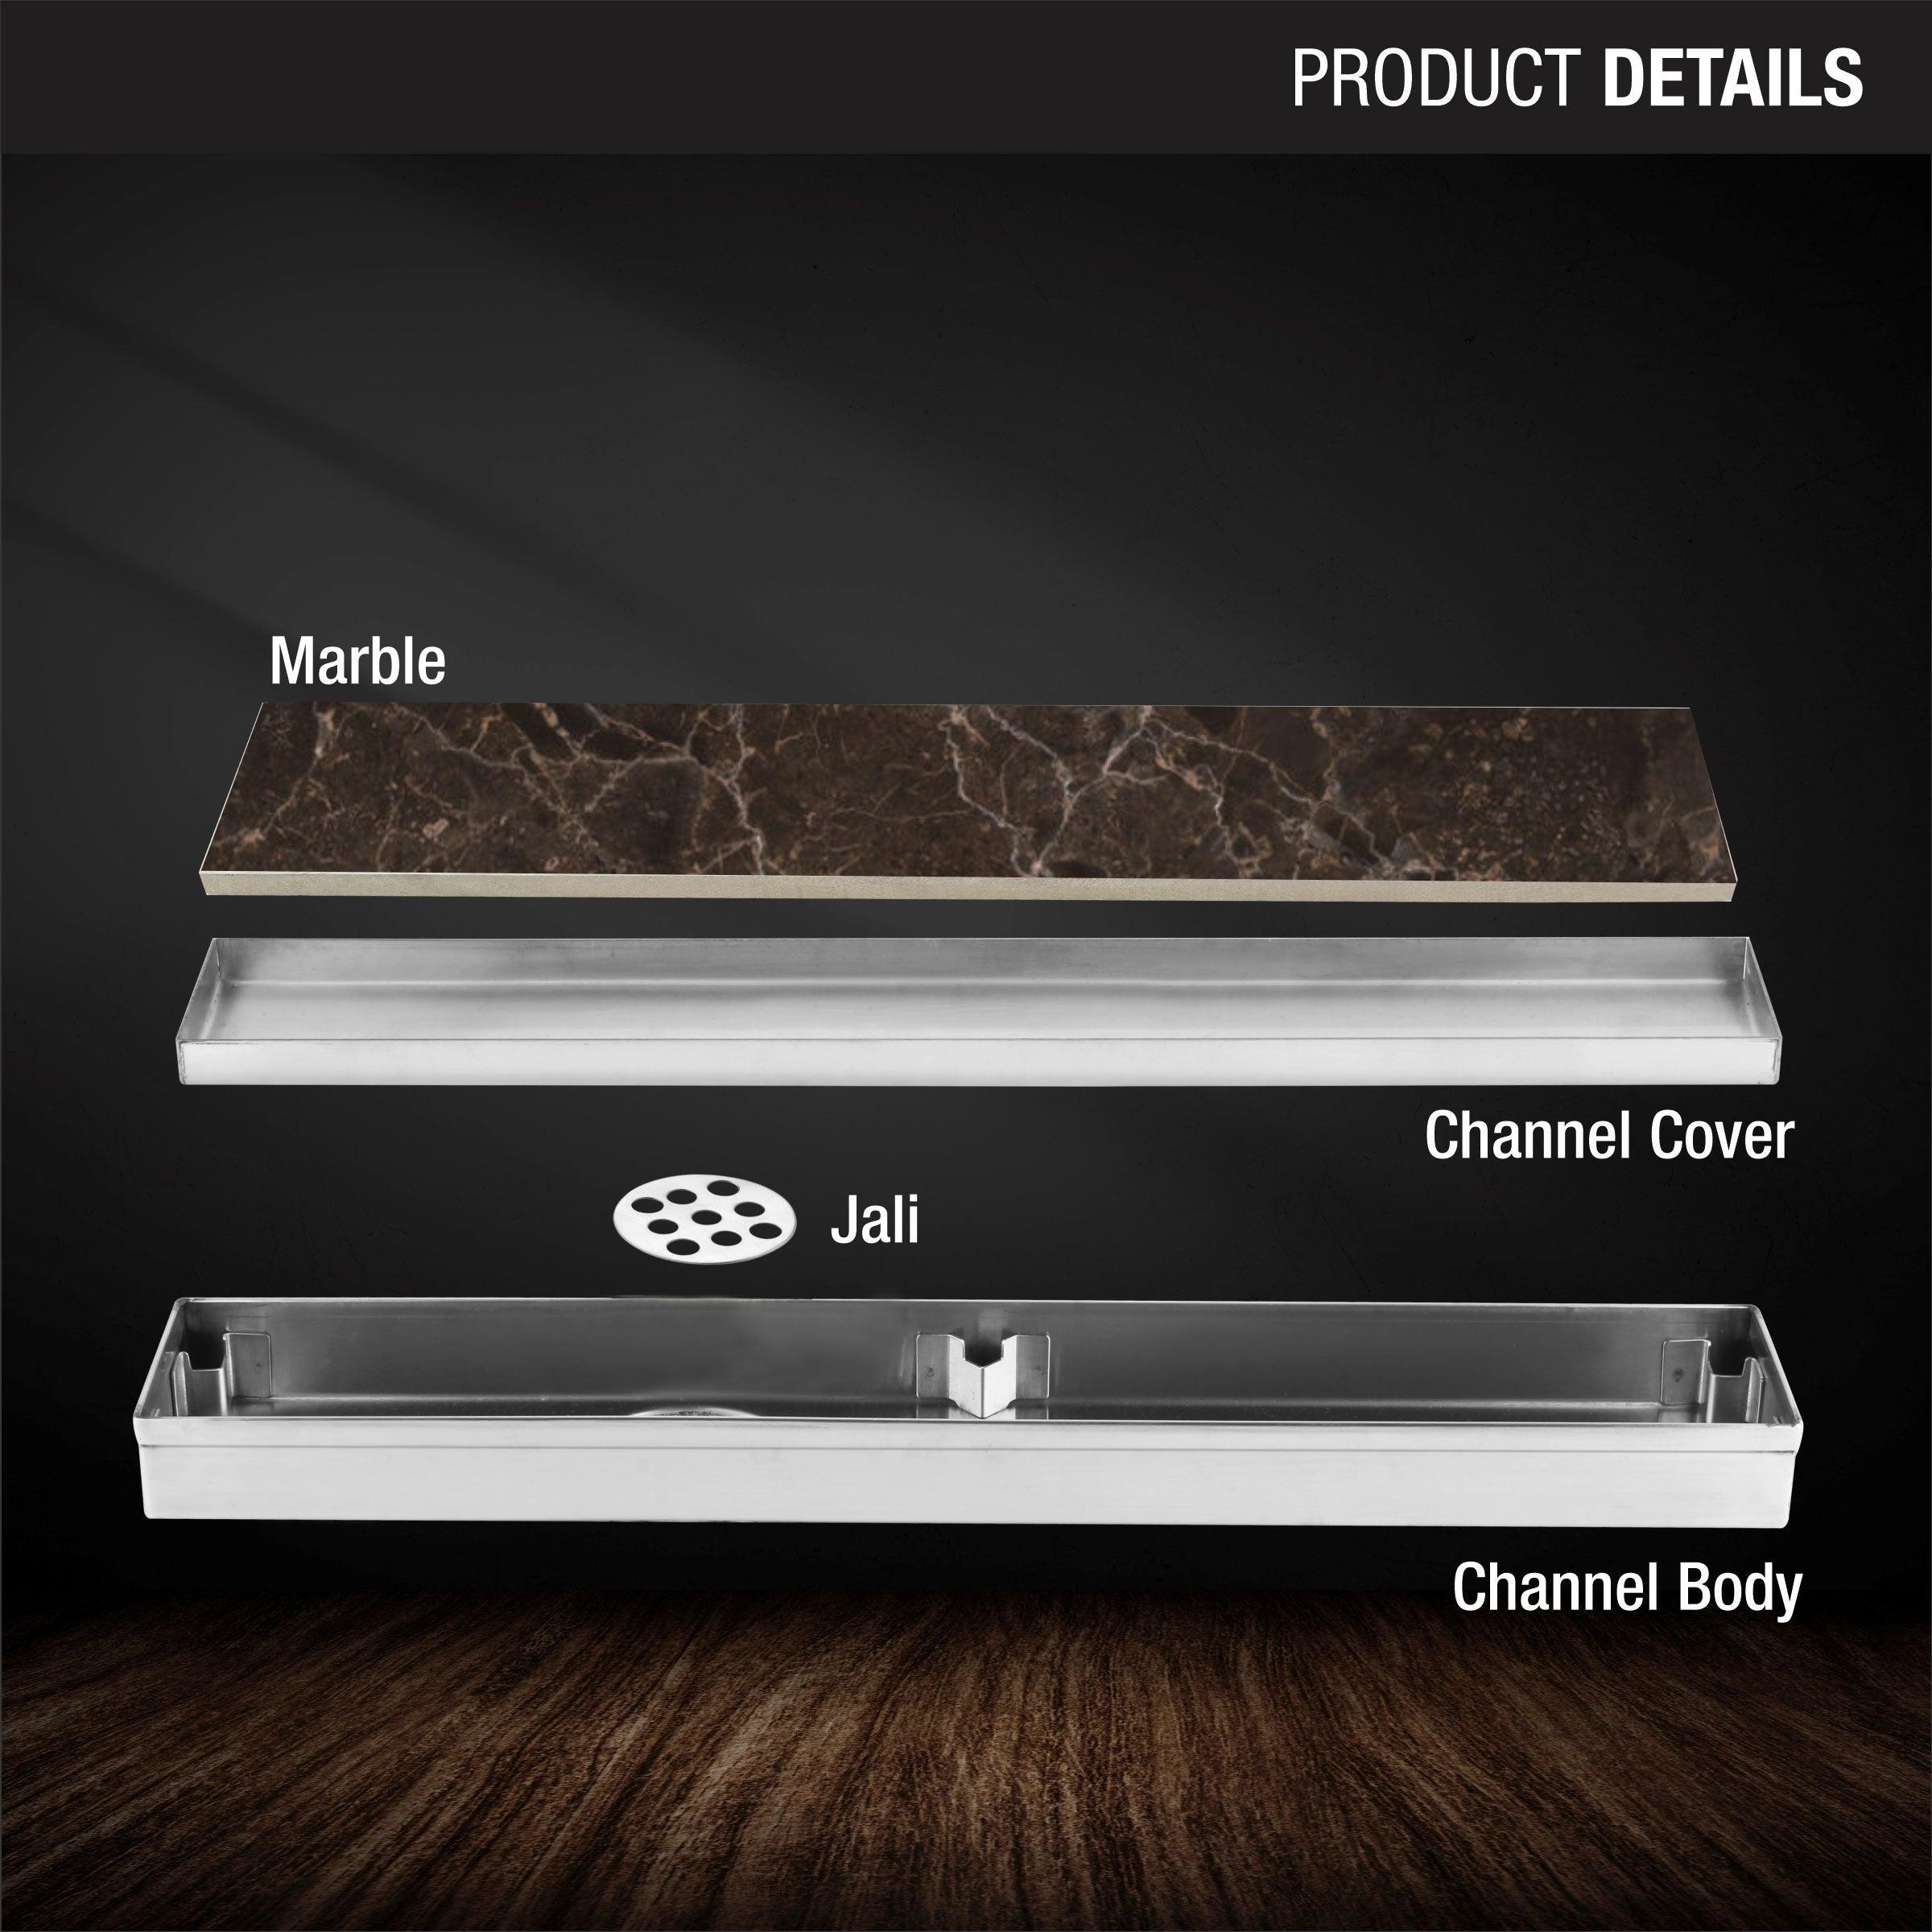 Marble Insert Shower Drain Channel (36 x 2 Inches) product details